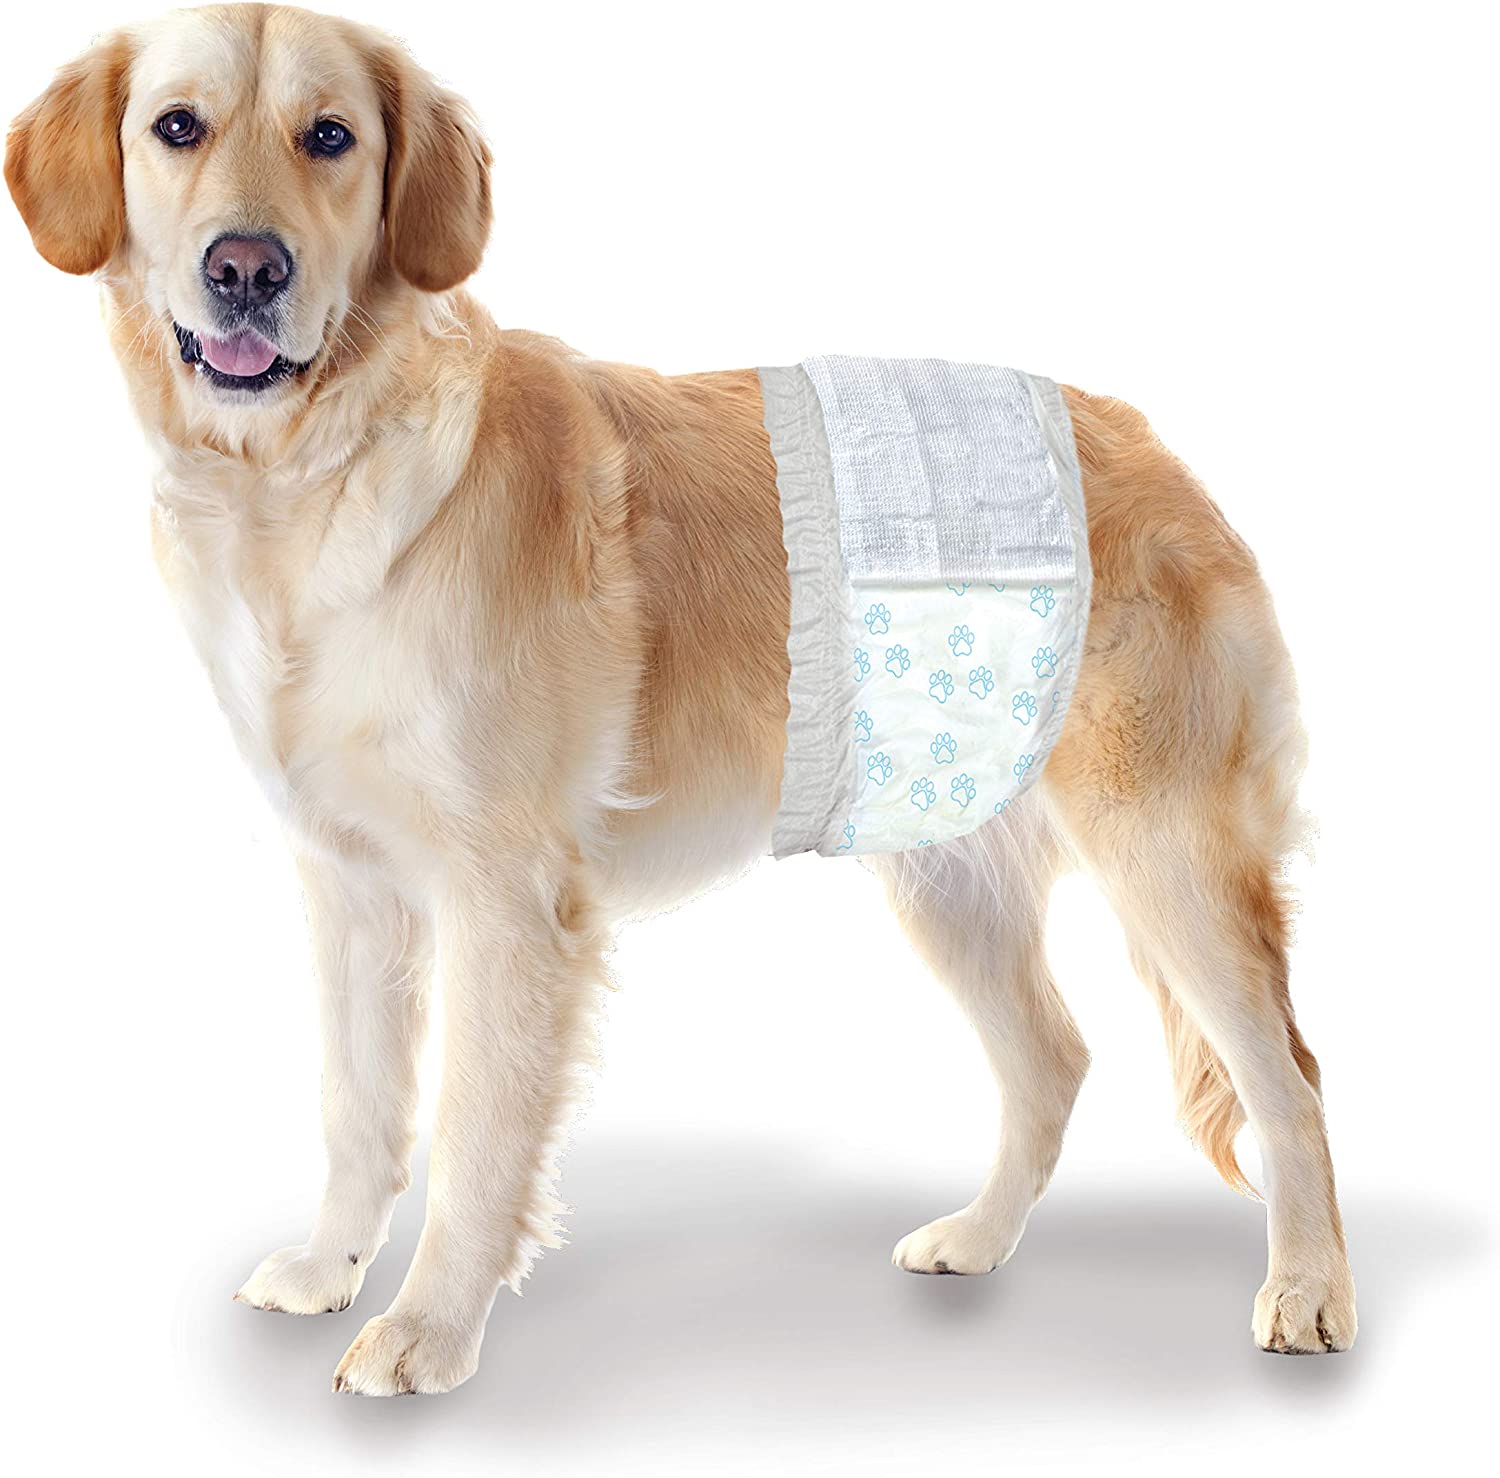 Wee-Wee Disposable Male Dog Wraps